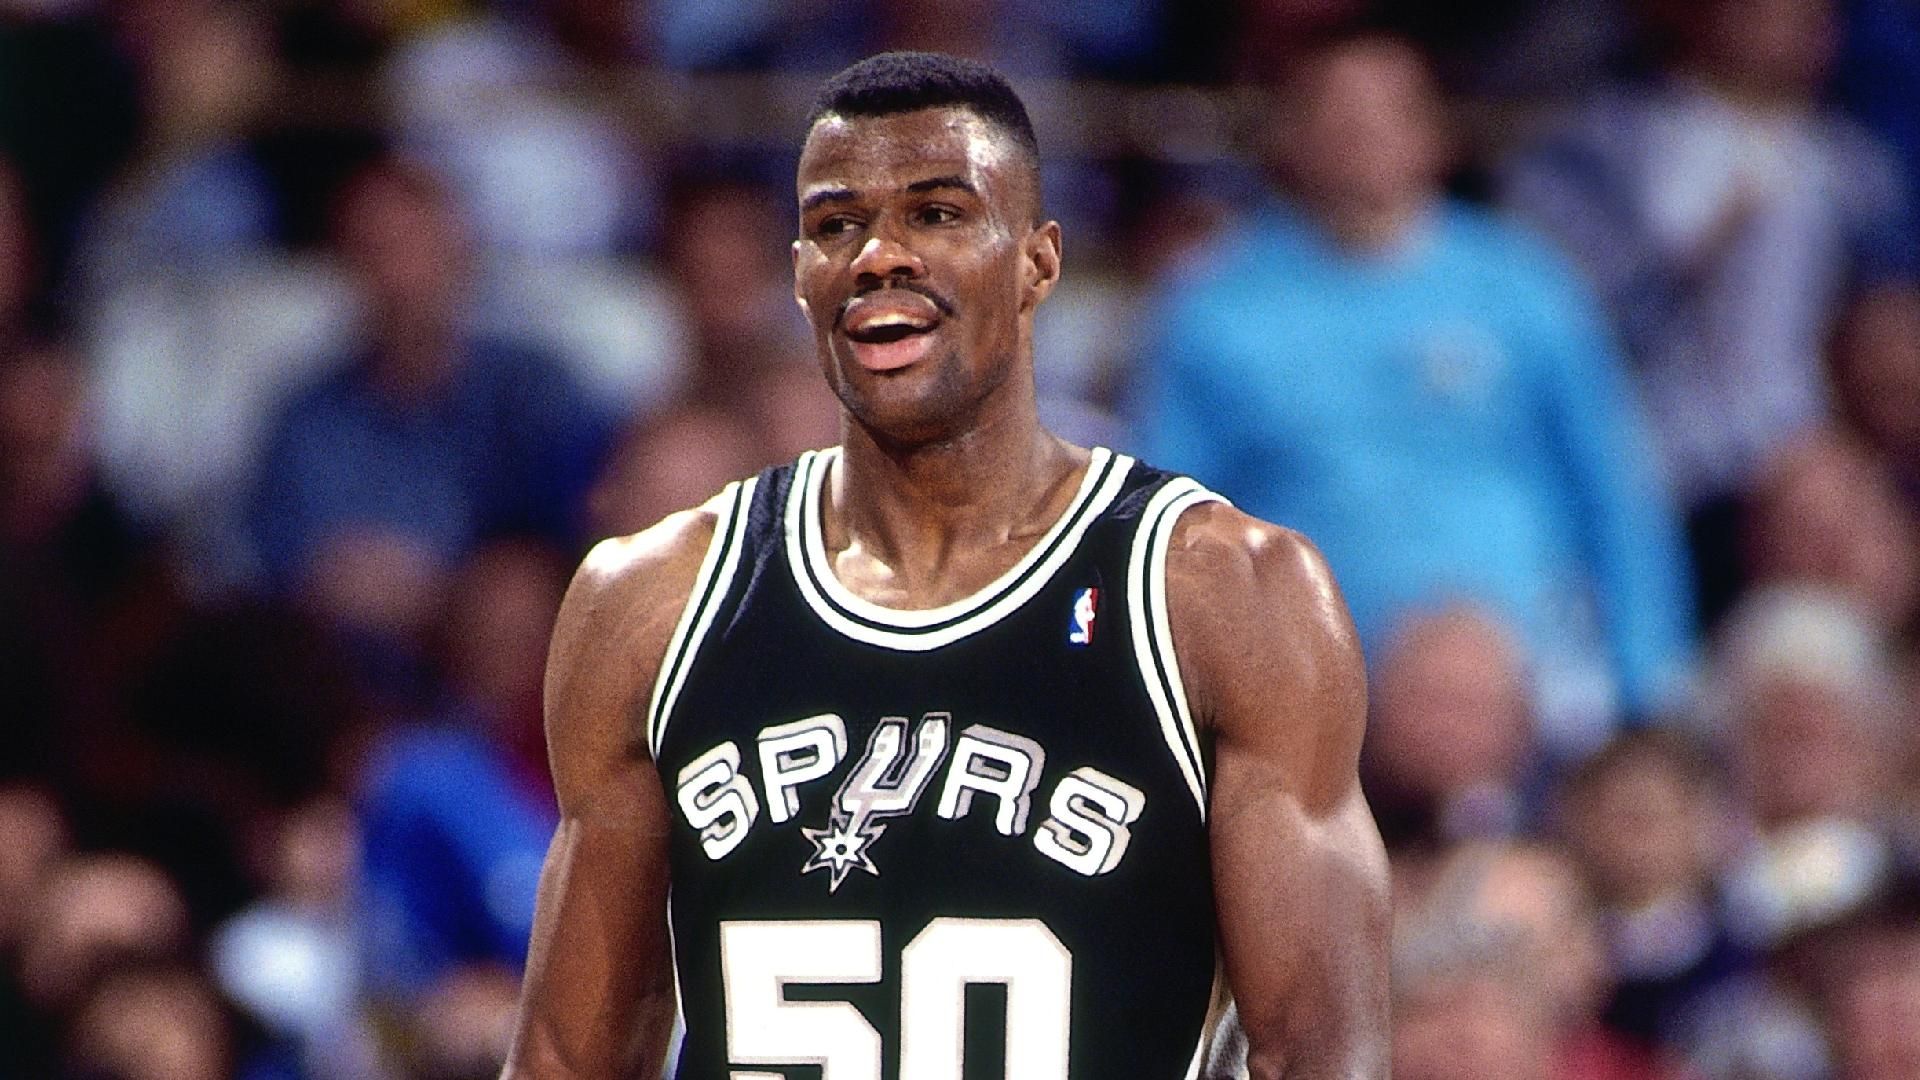 Ranking the greatest centers in NBA history